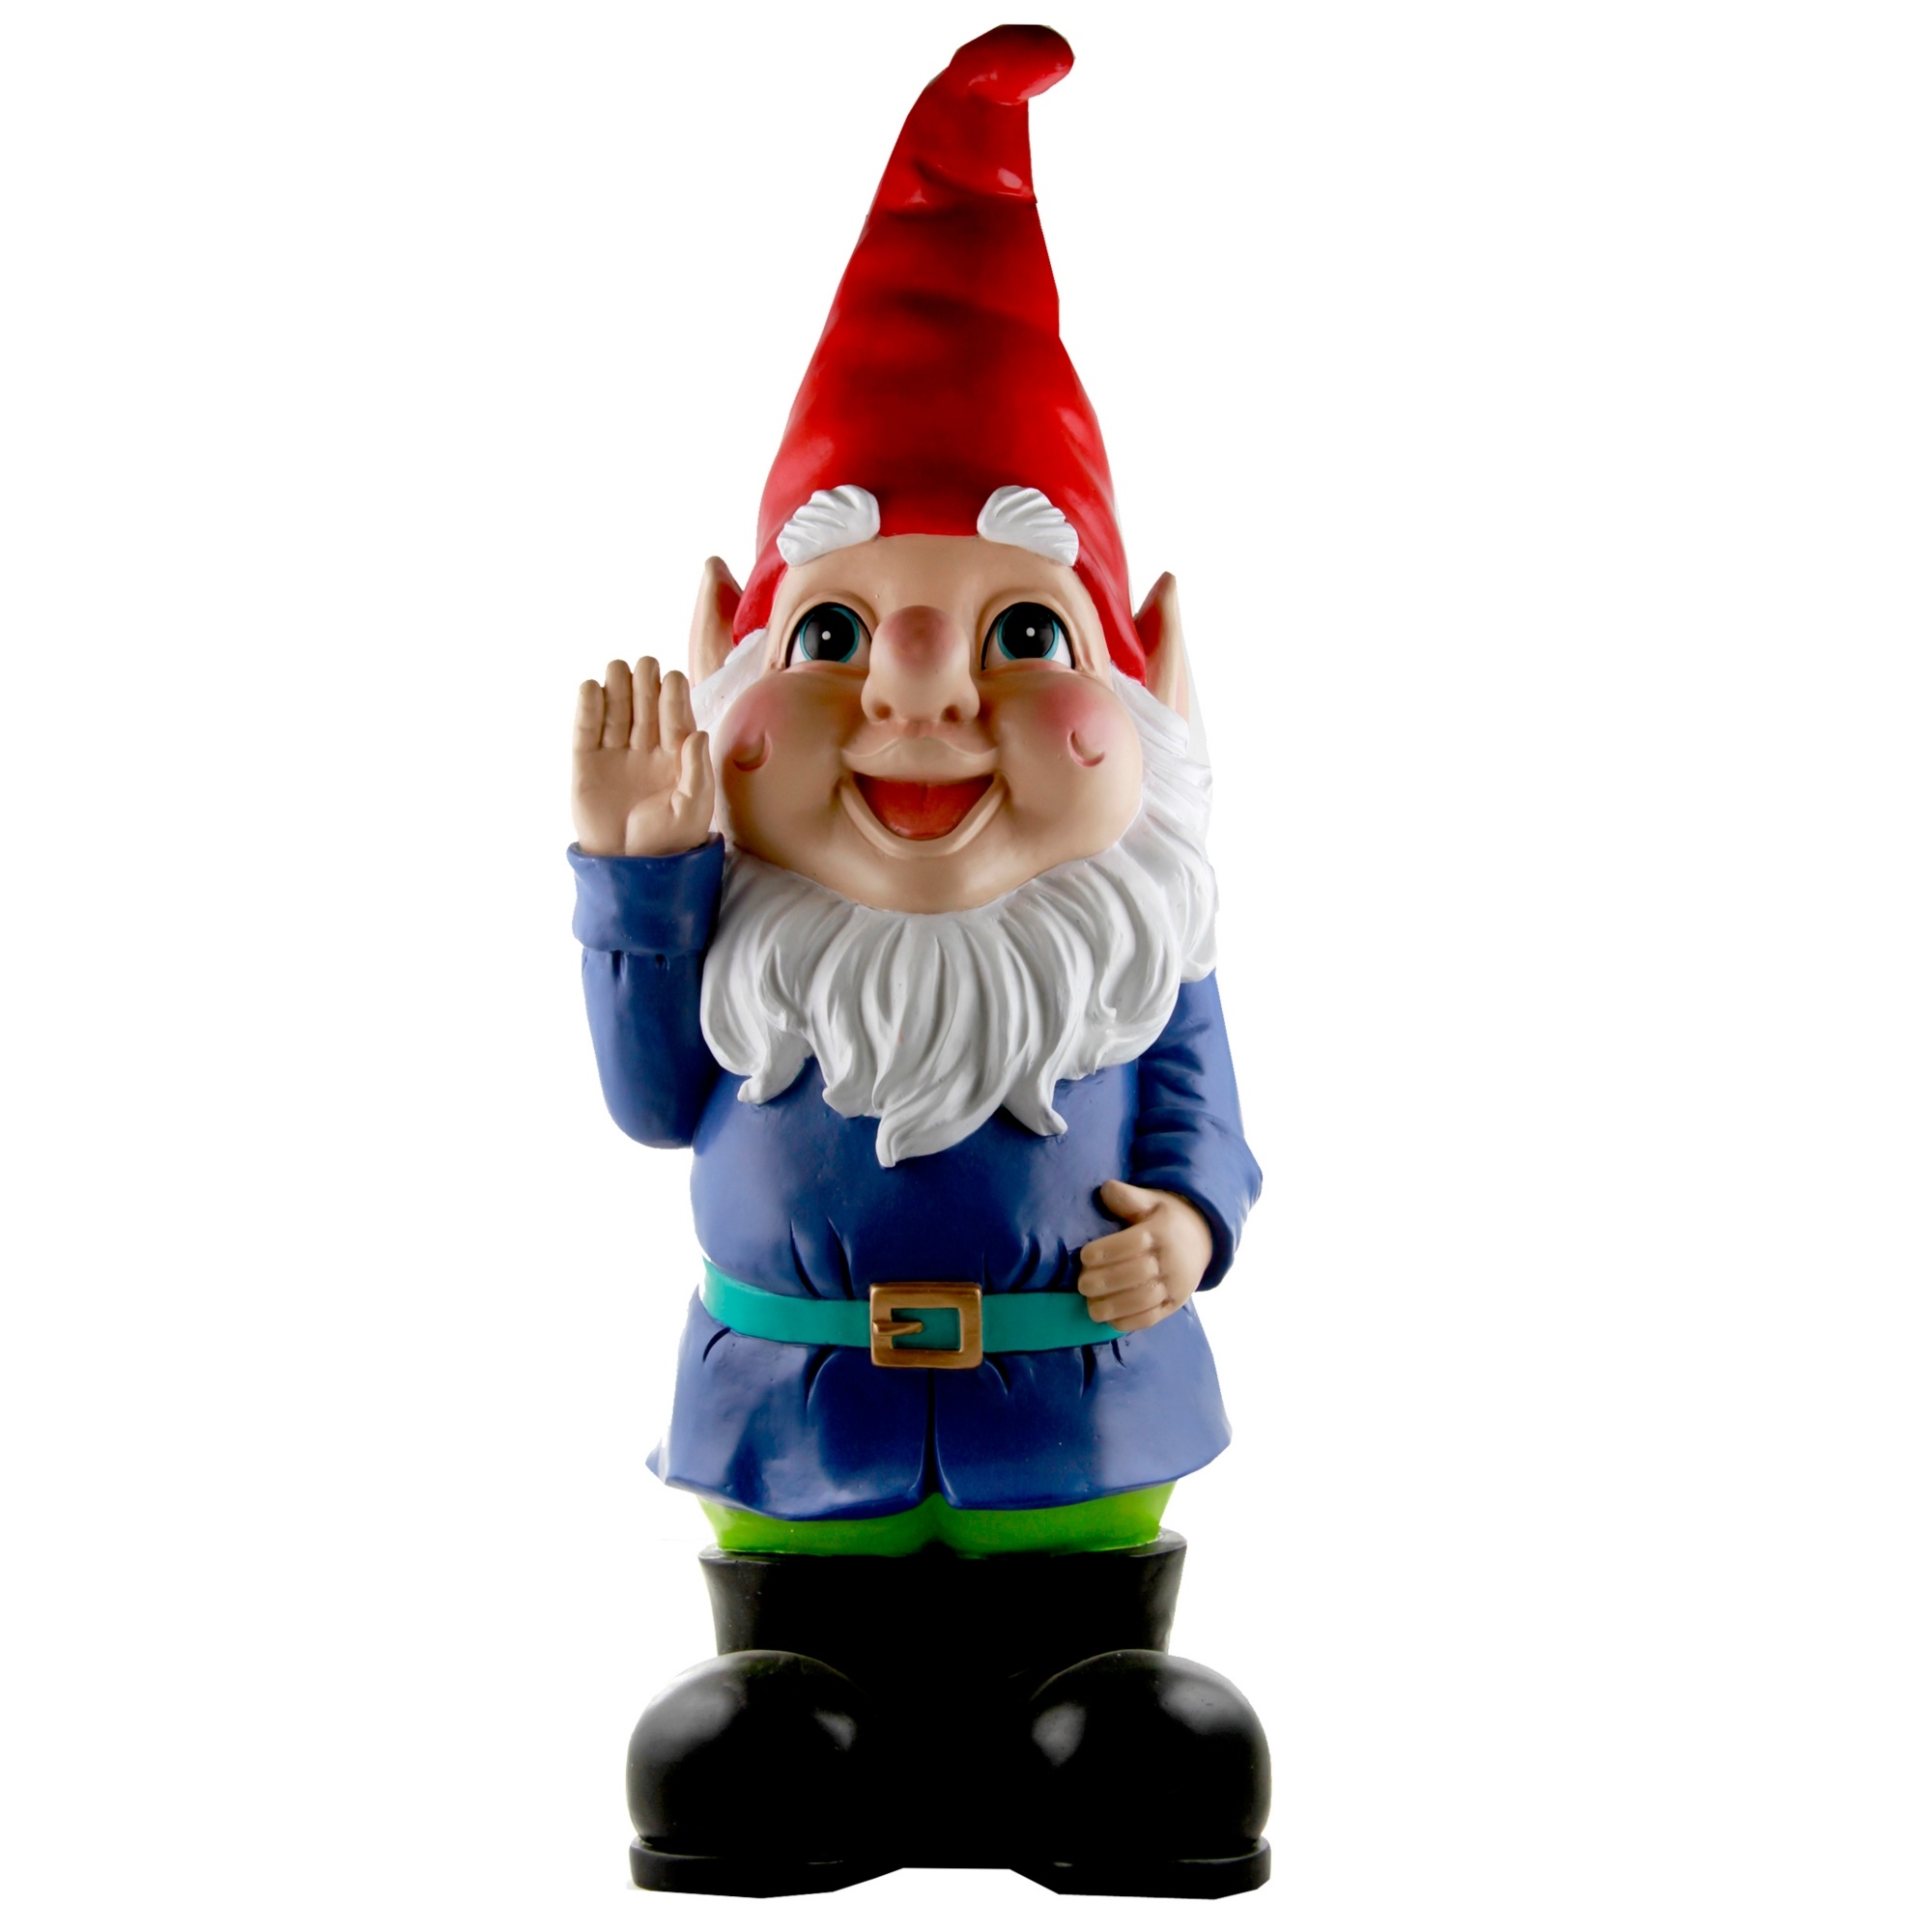 HQ gnome pictures, Gnome wallpapers, Stunning visuals, High-quality images, 2000x2000 HD Phone